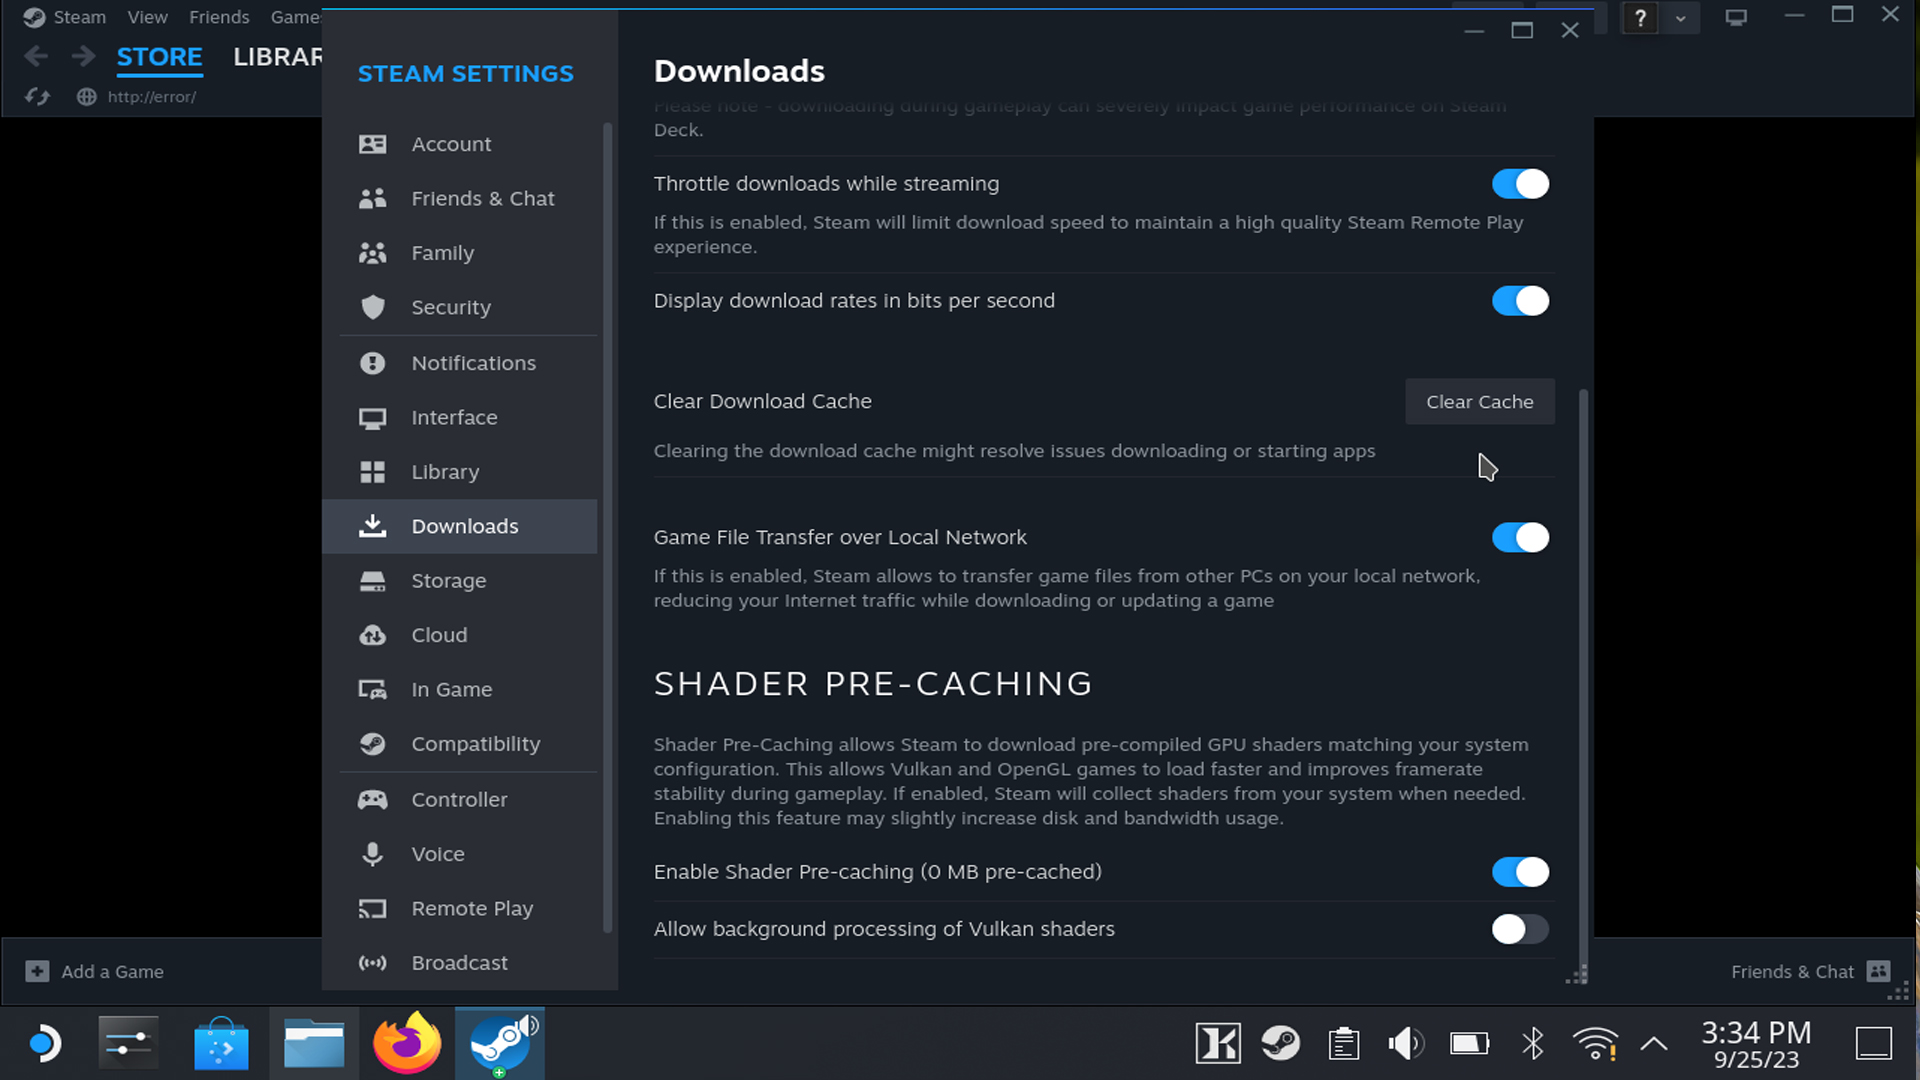 How to Clear Steam's Cache to Make the App Run Faster